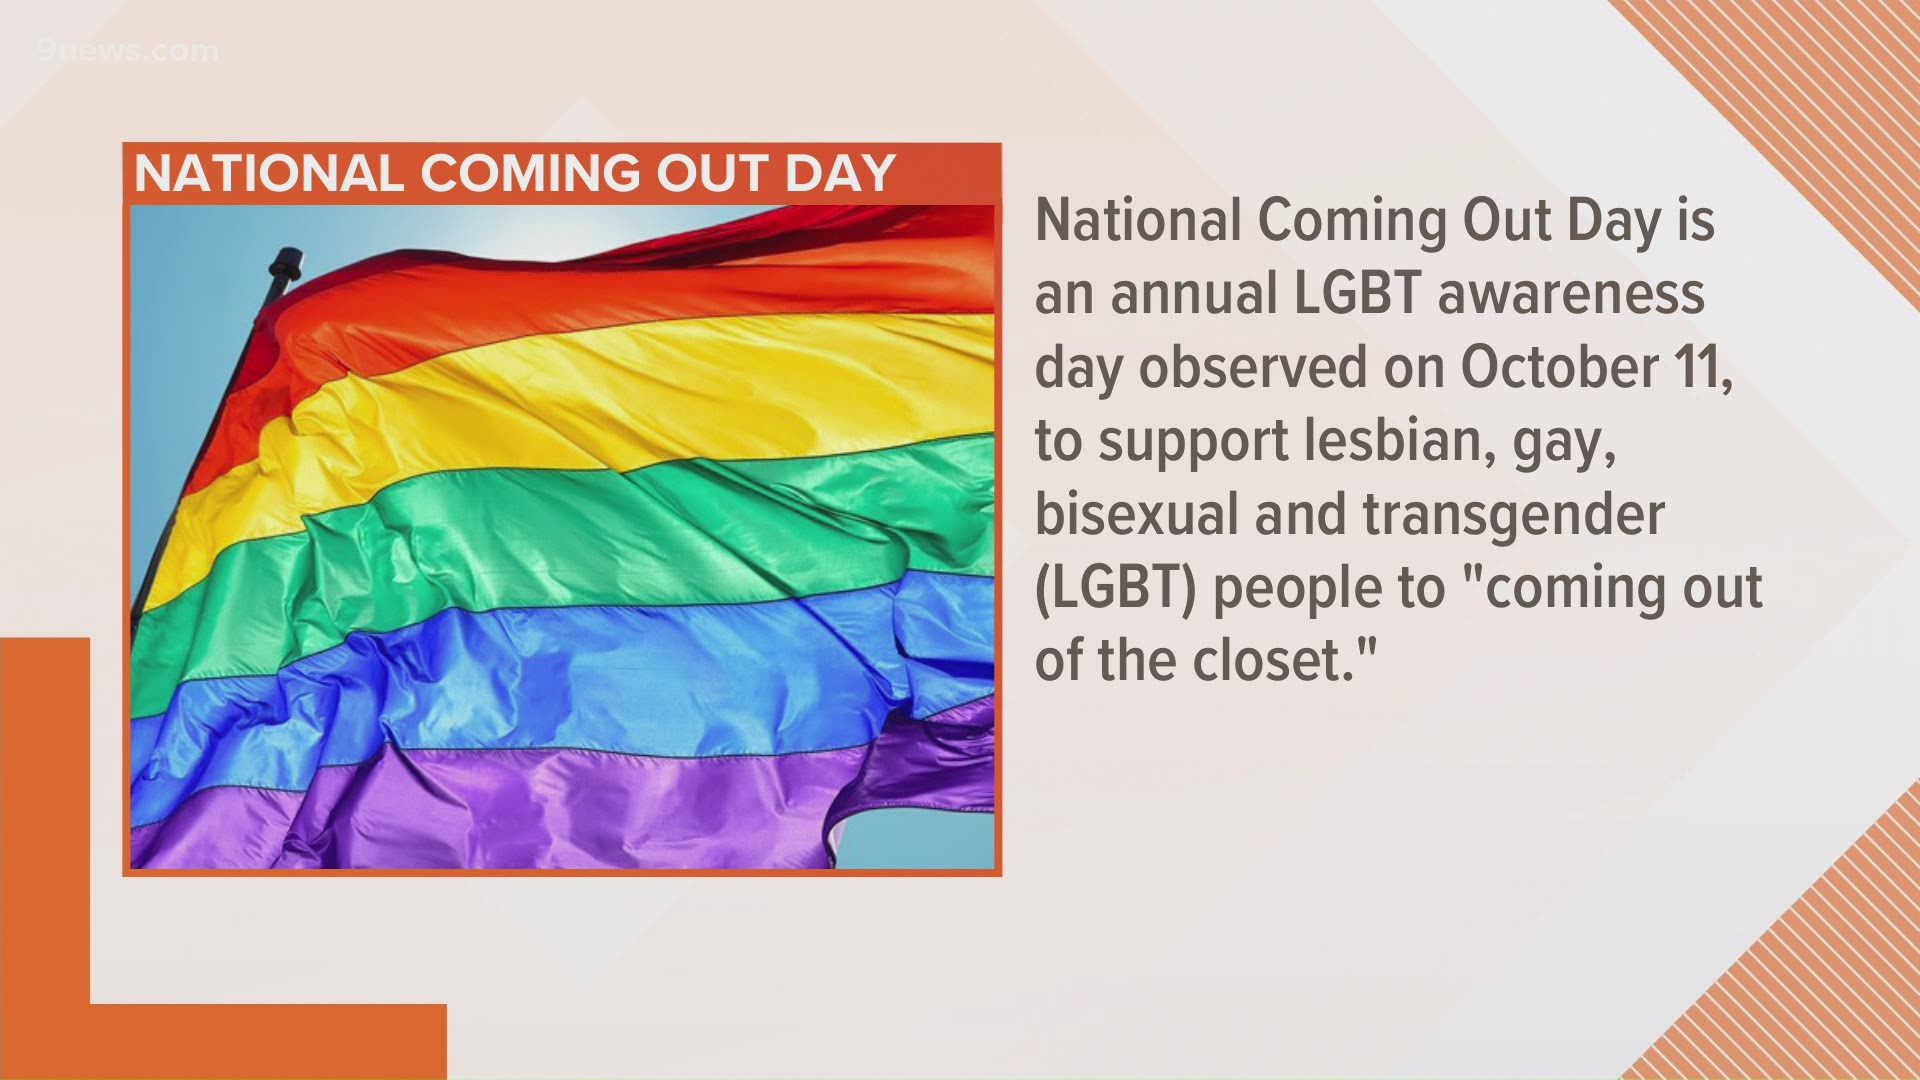 A family lawyer who specializes in cases involving LGBTQ individuals discusses National Coming Out Day.